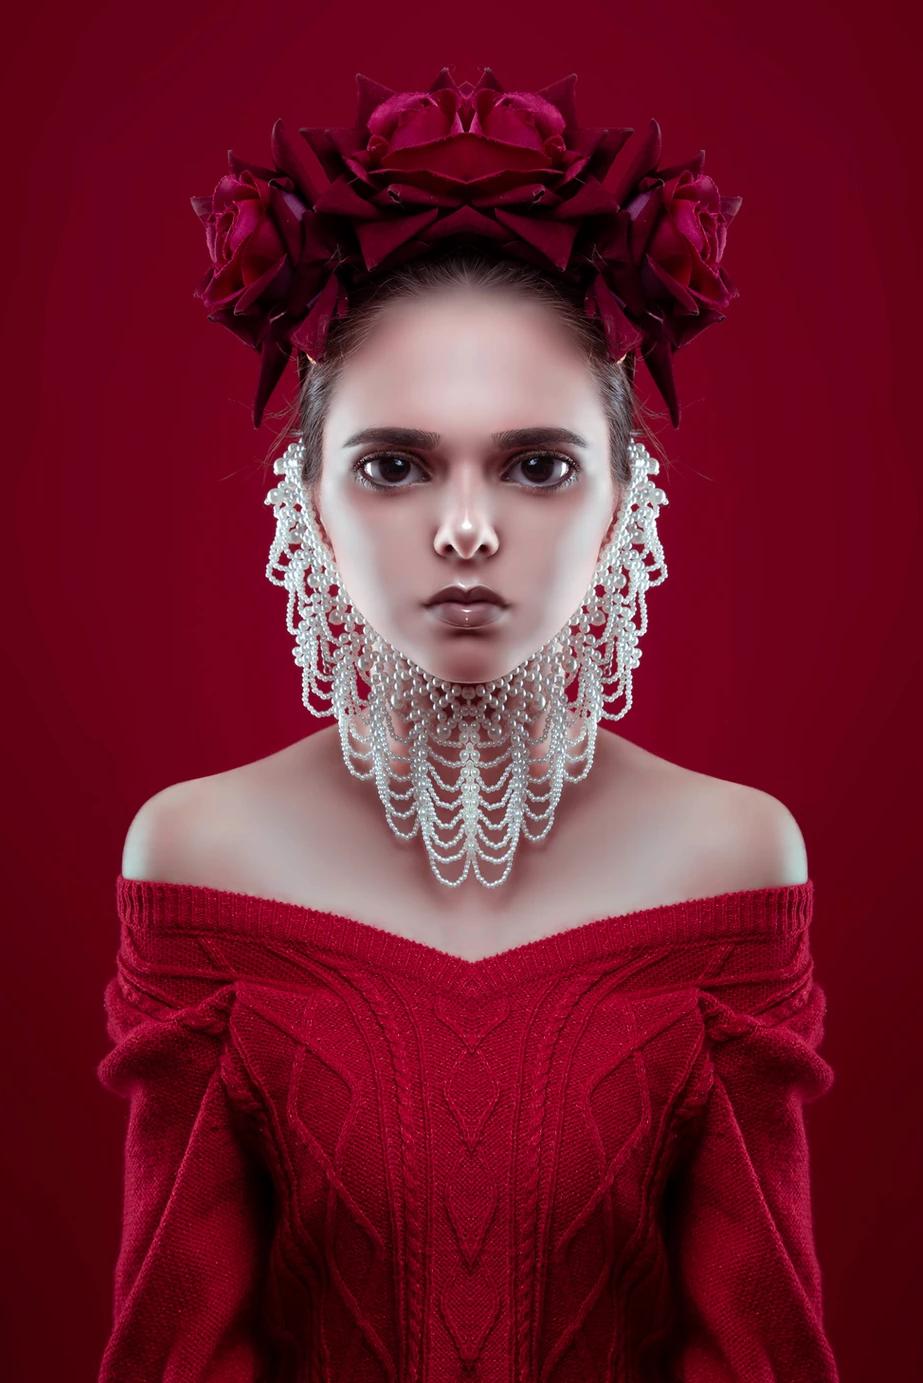 Pearls and Red Roses - Photograph by Carlos Gamez De Francisco